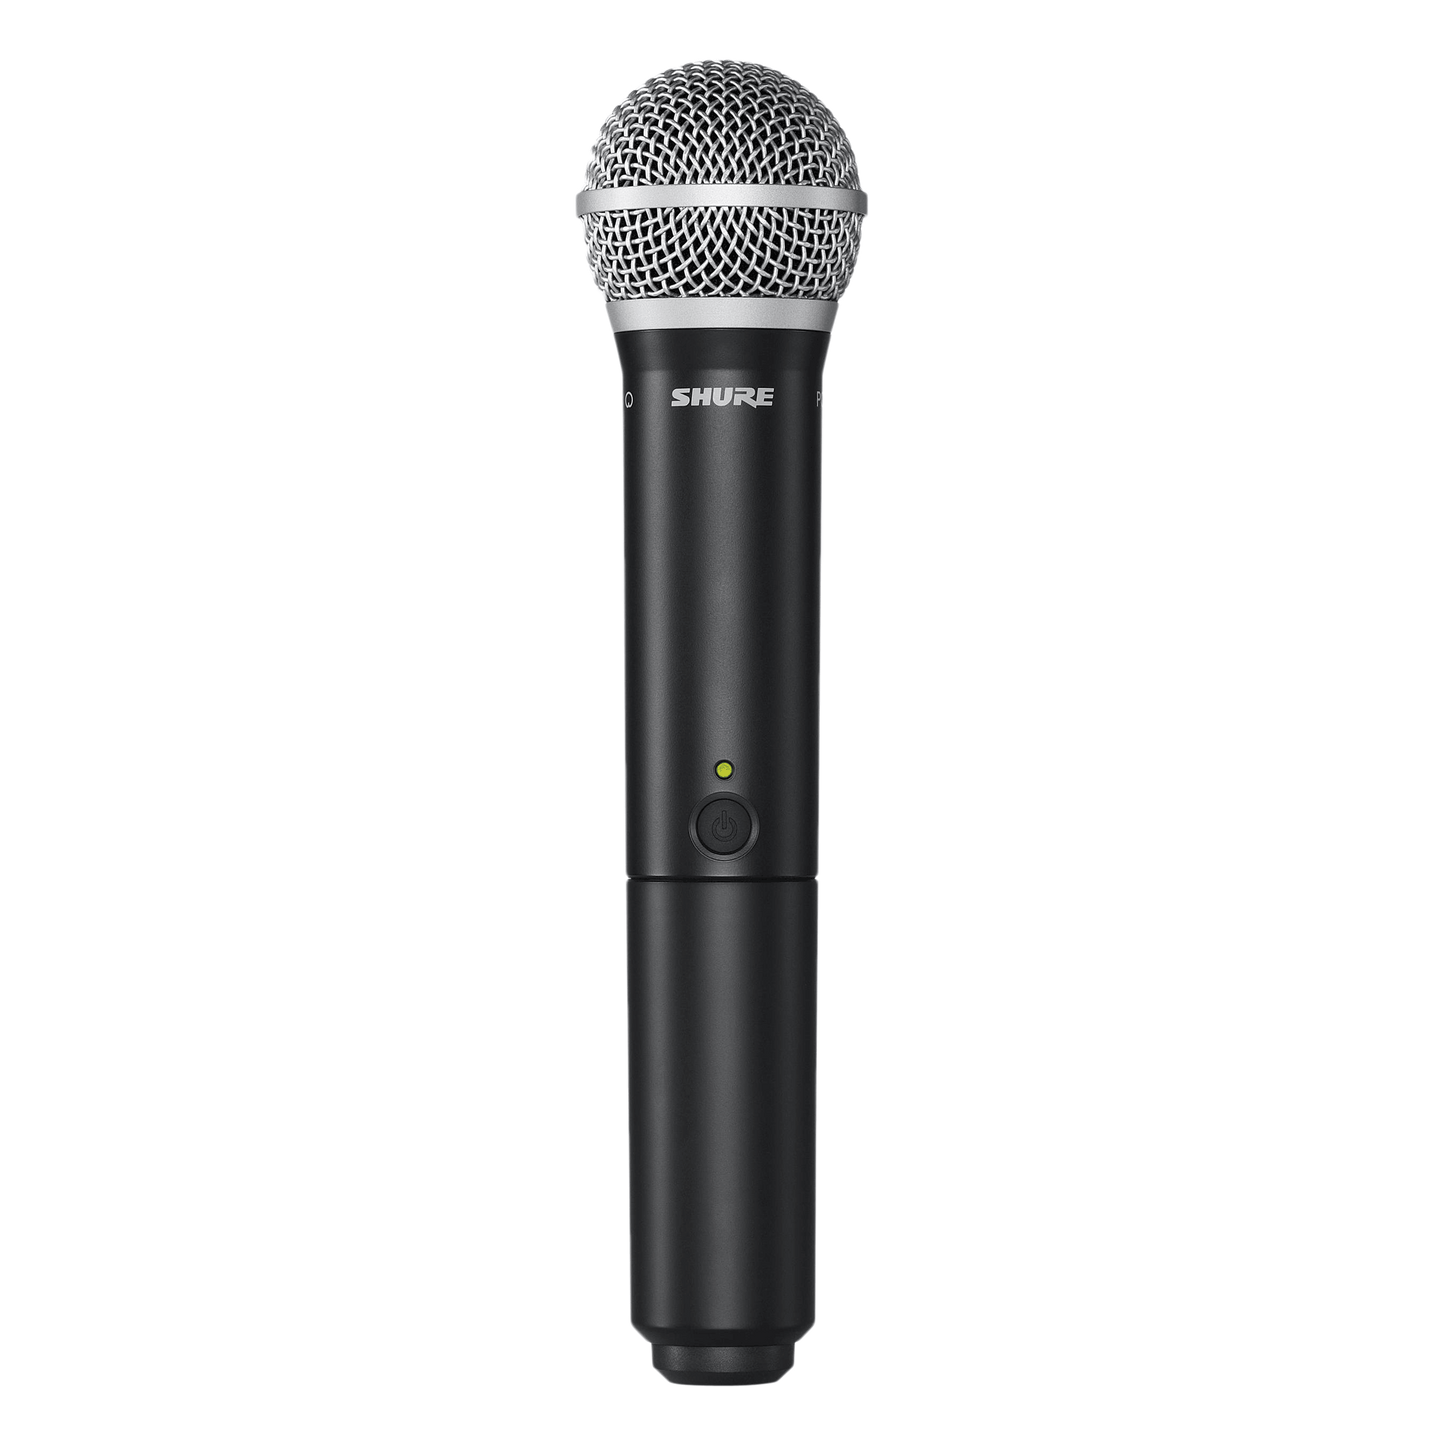 Shure BLX2 Handheld Transmitter with PG58 Microphone (J10: 584 - 608 MHz)